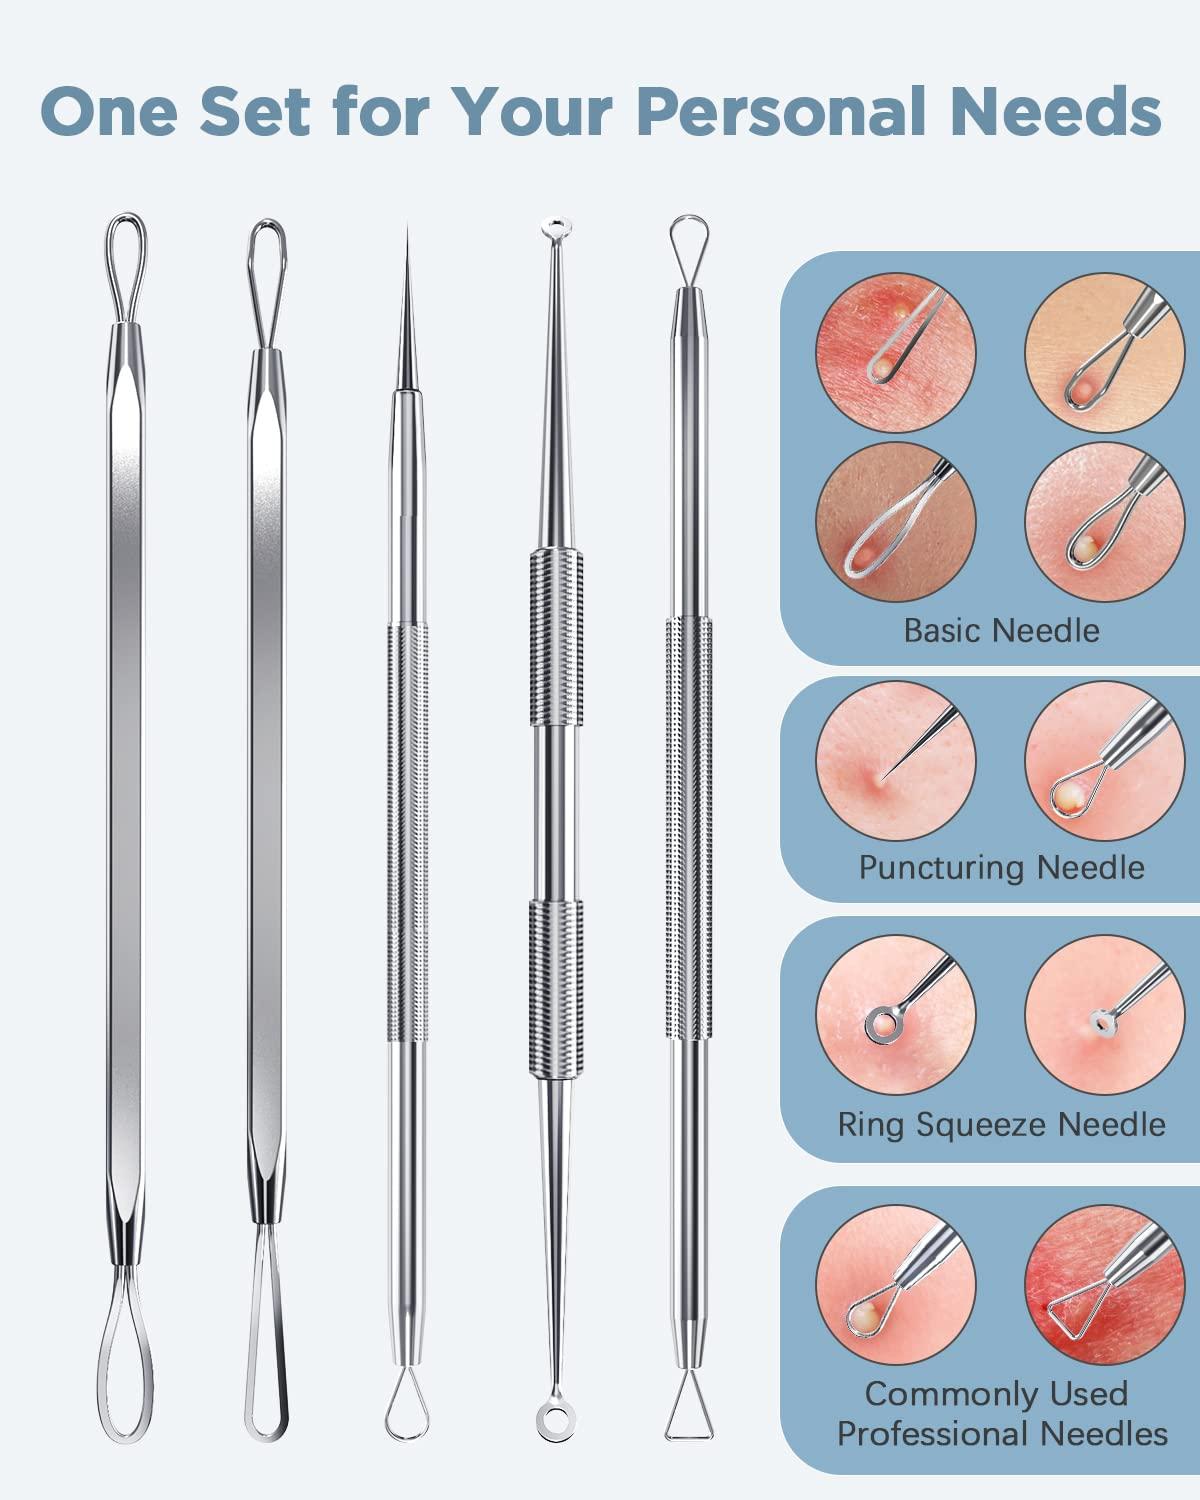 TAYTHI Blackhead Remover Tool Pimple Popper Kit Blackhead Extractor tool for Face Tool for Zit Acne Whitehead Blemish Stainless Steel Extraction tools Silver